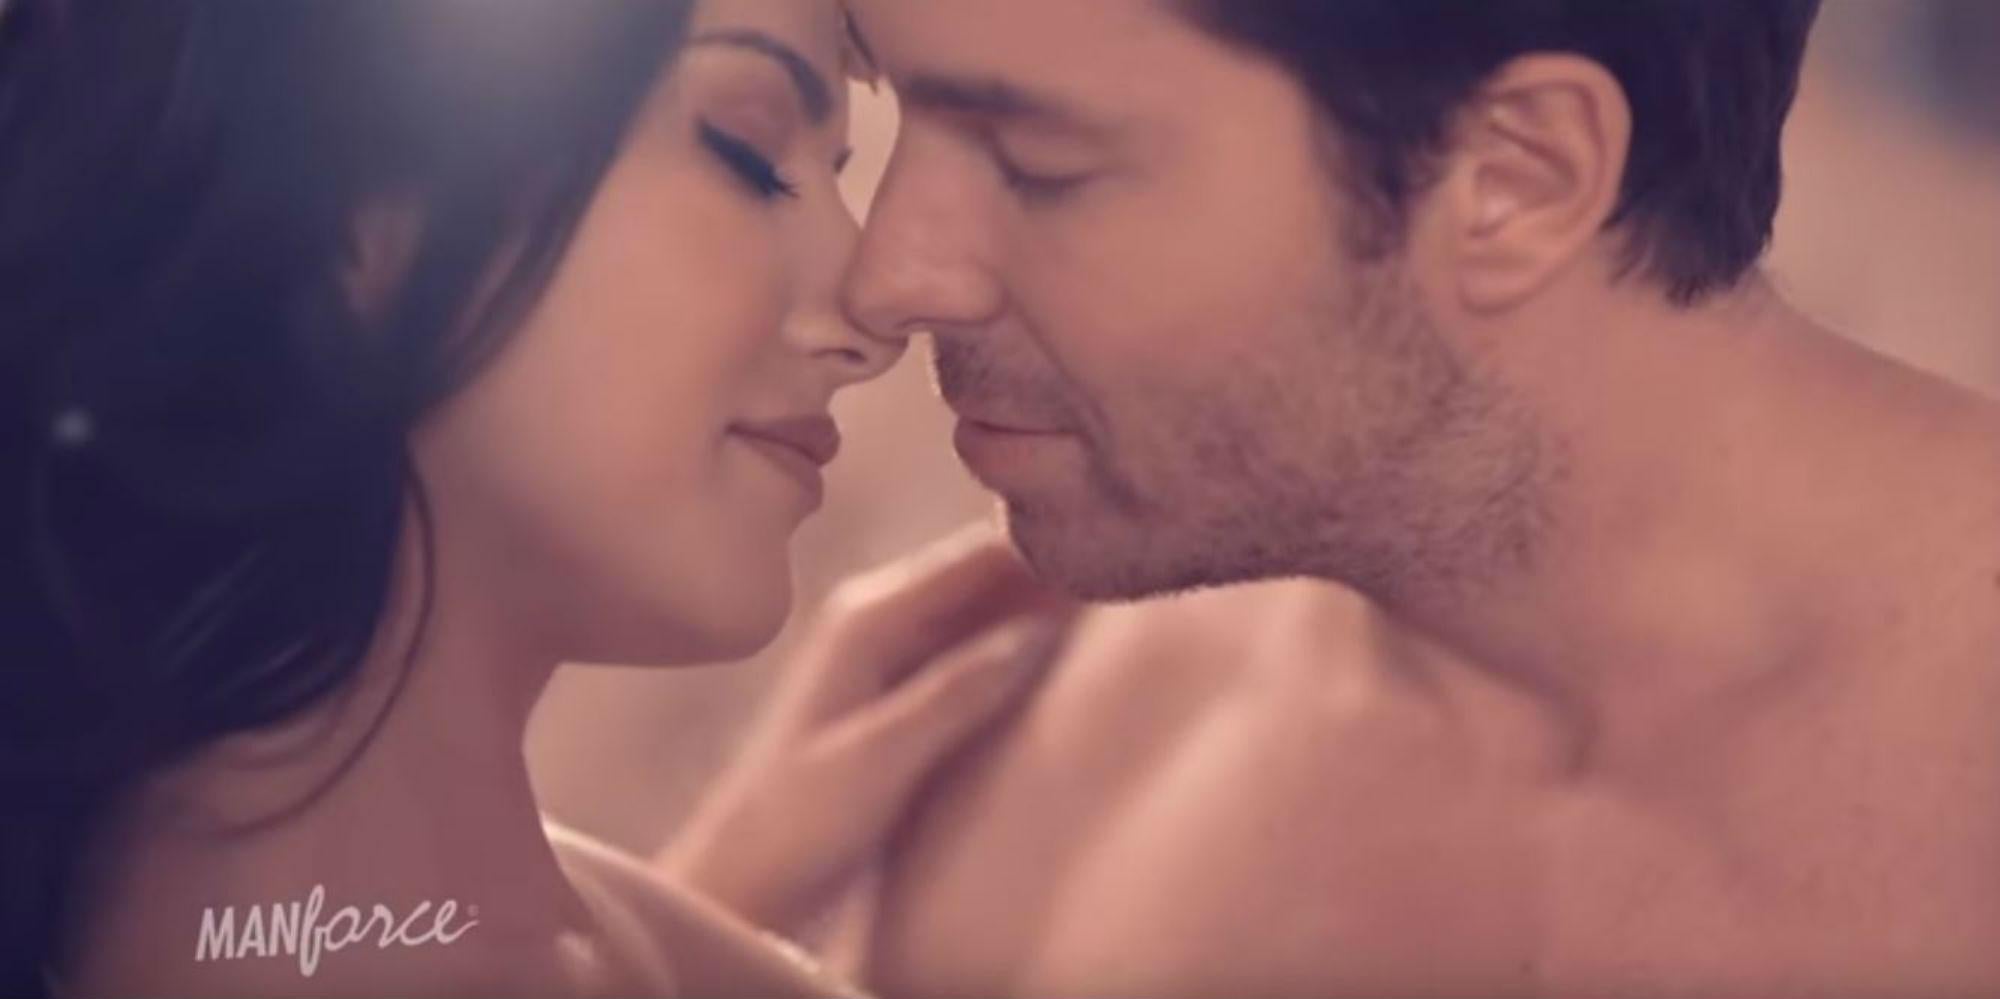 Sex Female Condom Used In Sunny Leone - A condom advert featuring an ex porn star is causing fury in India |  indy100 | indy100